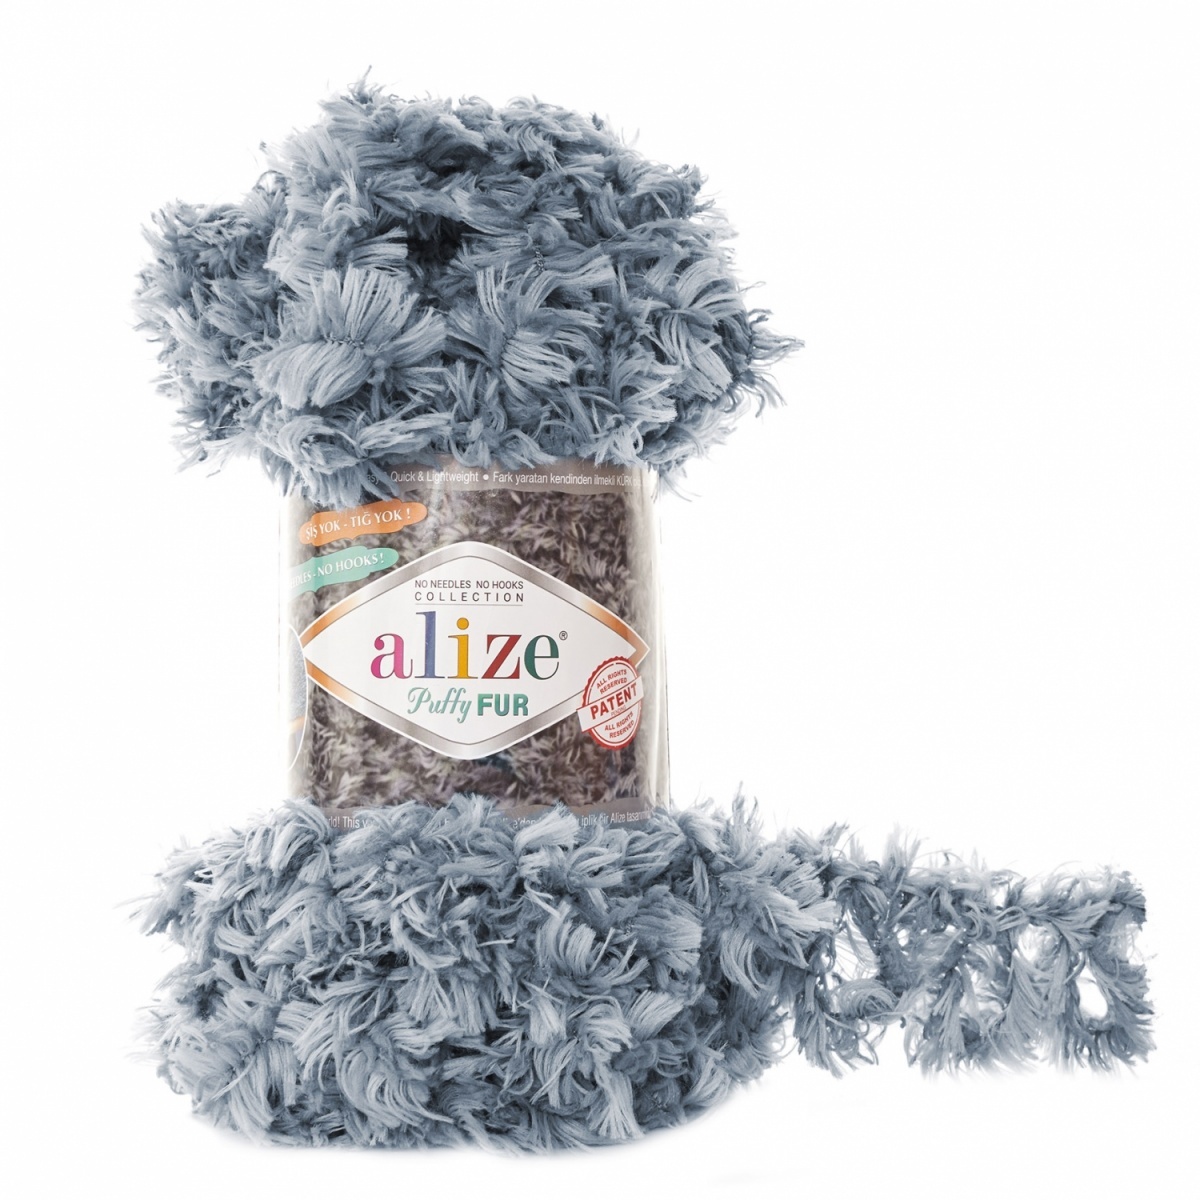 Alize Puffy Fur, 100% Polyester 5 Skein Value Pack, 500g фото 8